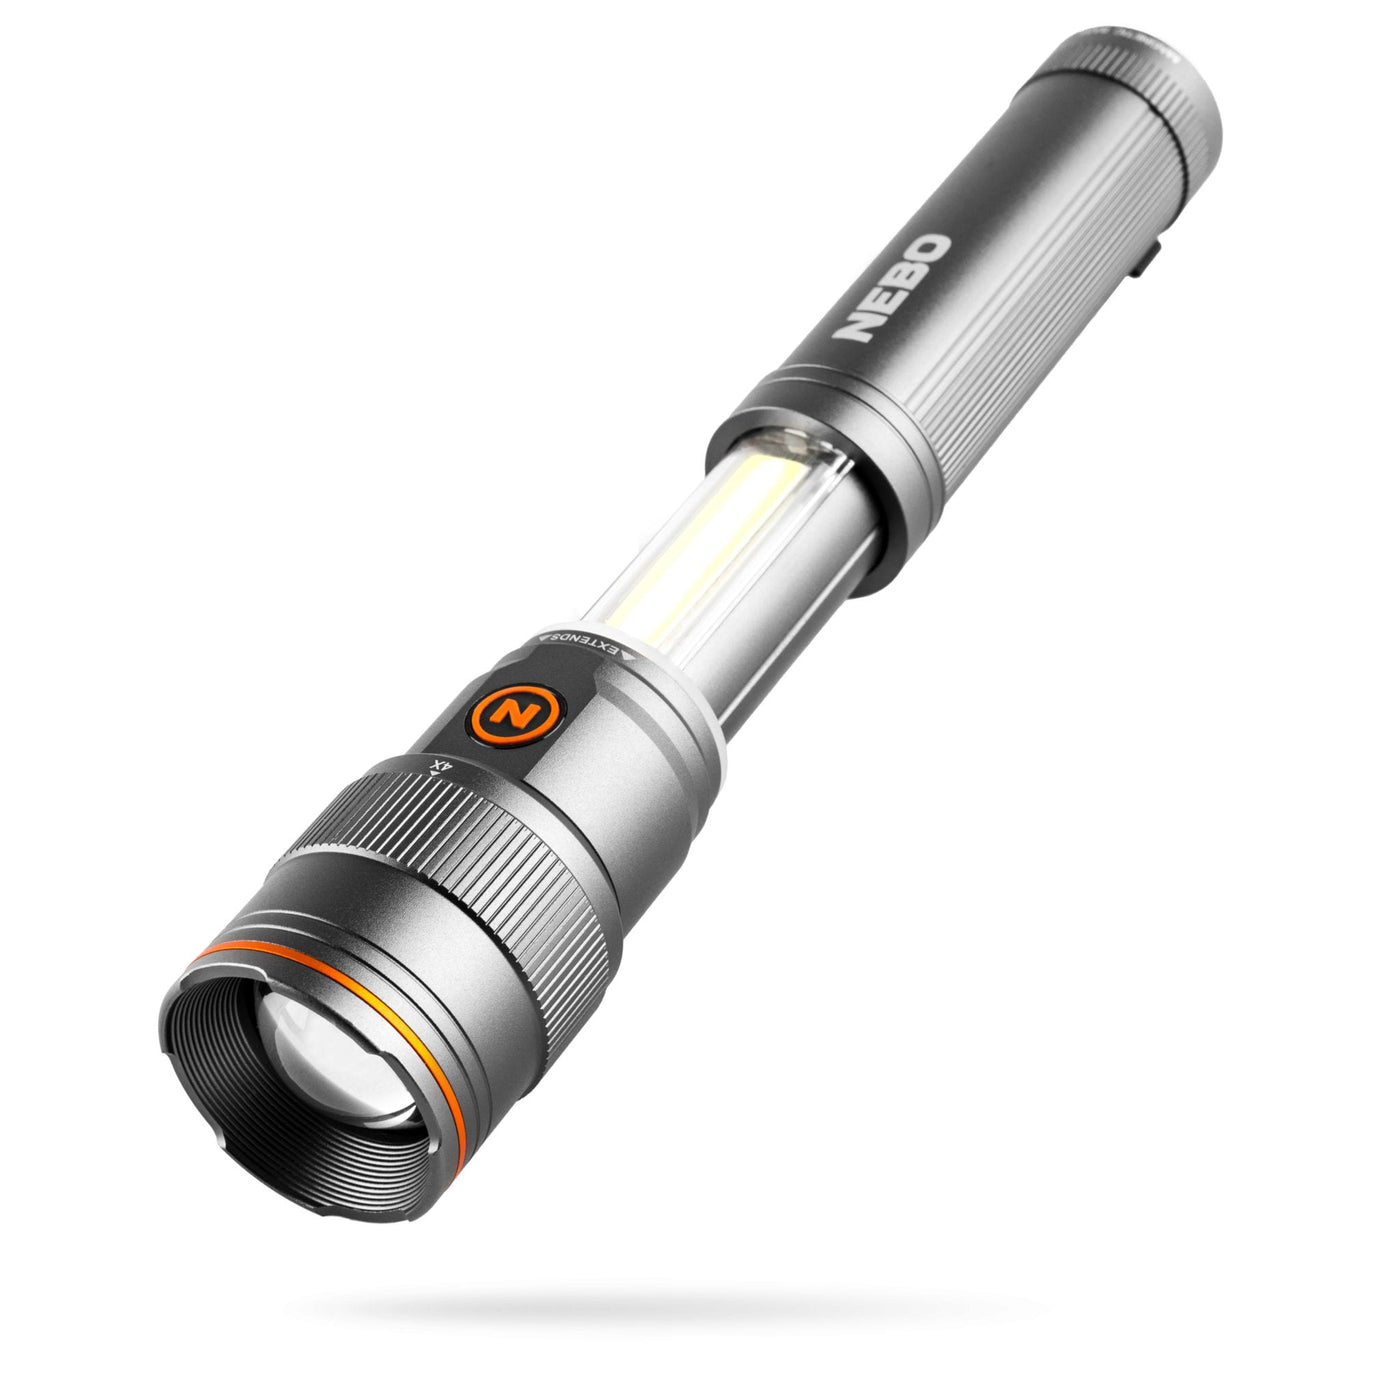 At Nebo Tools, we continually innovate so that we can offer the highest quality LED lighting products at the best price. The Franklin™ Slide is a high-powered 500 lumen COB LED flashlight and work light, retractable clip, and powerful magnetic base. It features 7 light modes, Direct-to-Red, and Power Memory Recall. The powerful LED flashlight can shine up to 160 meters away. The included battery allows for up to 60 hours of operation in between charges.